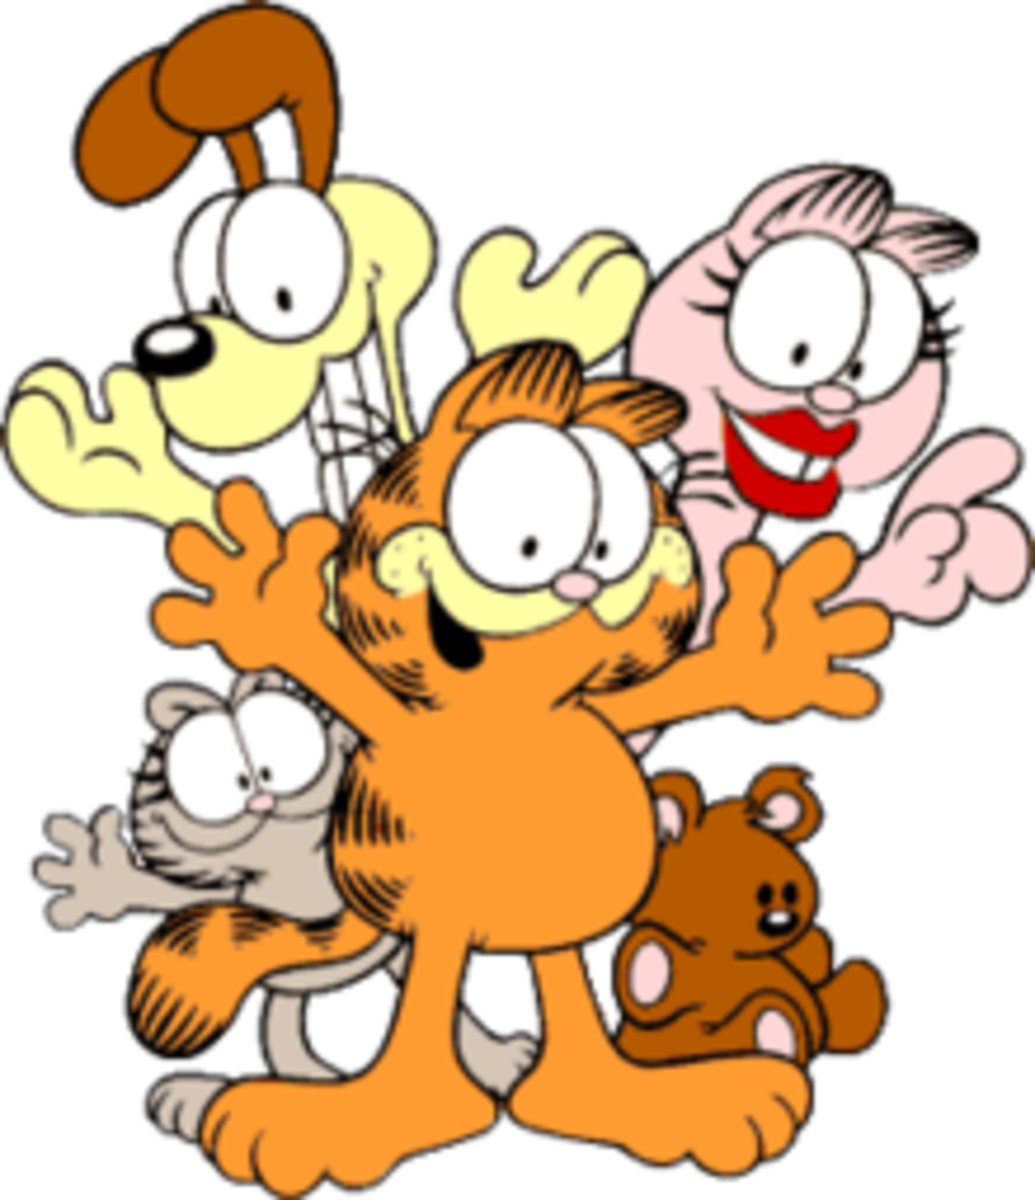 Some of the characters featured in the animated series.